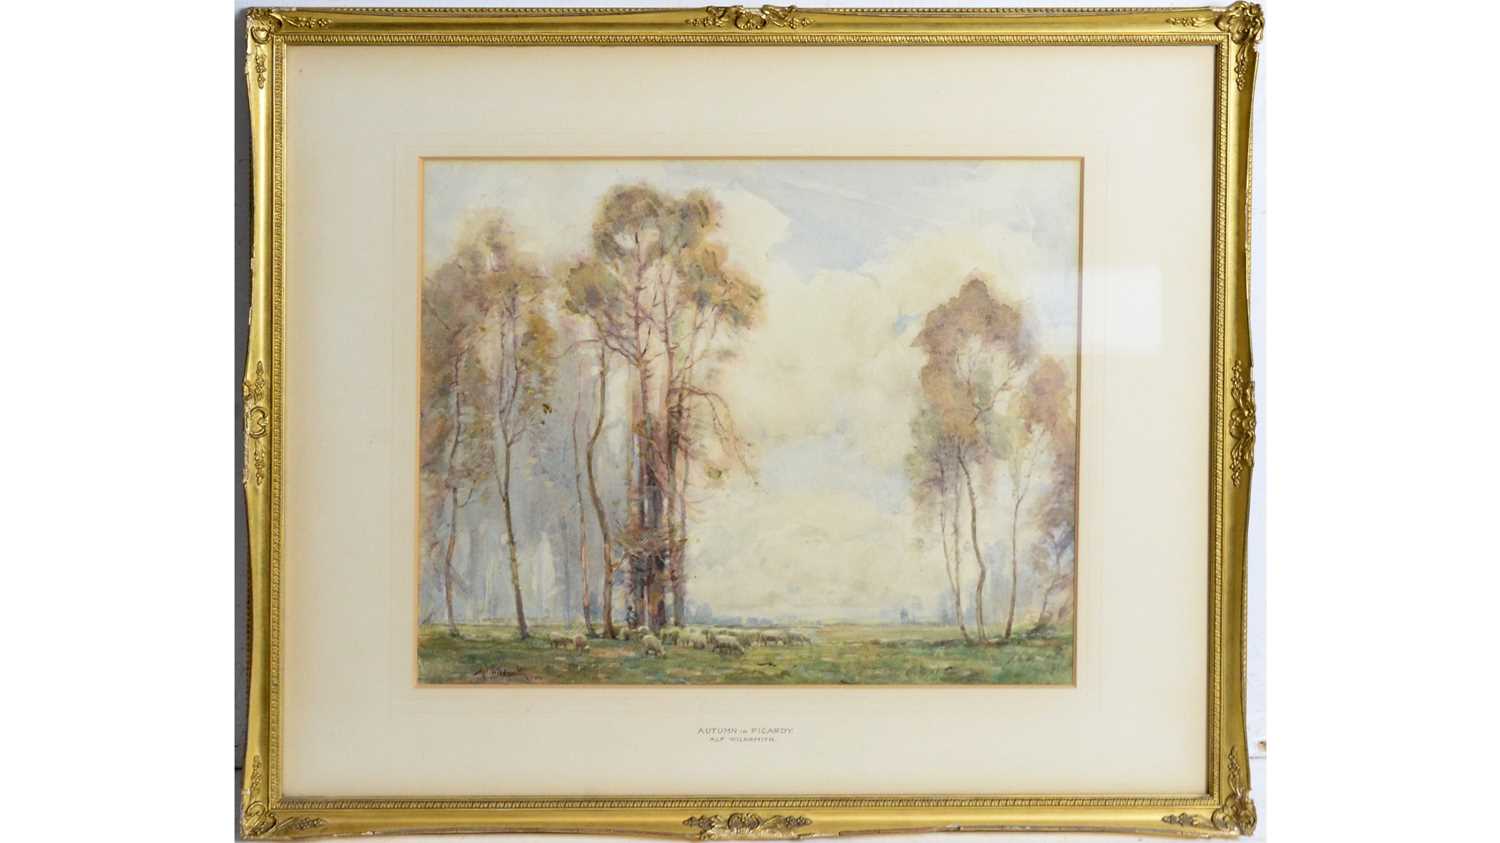 Lot 877 - Alfred Wildsmith - Autumn in Picardy | watercolour